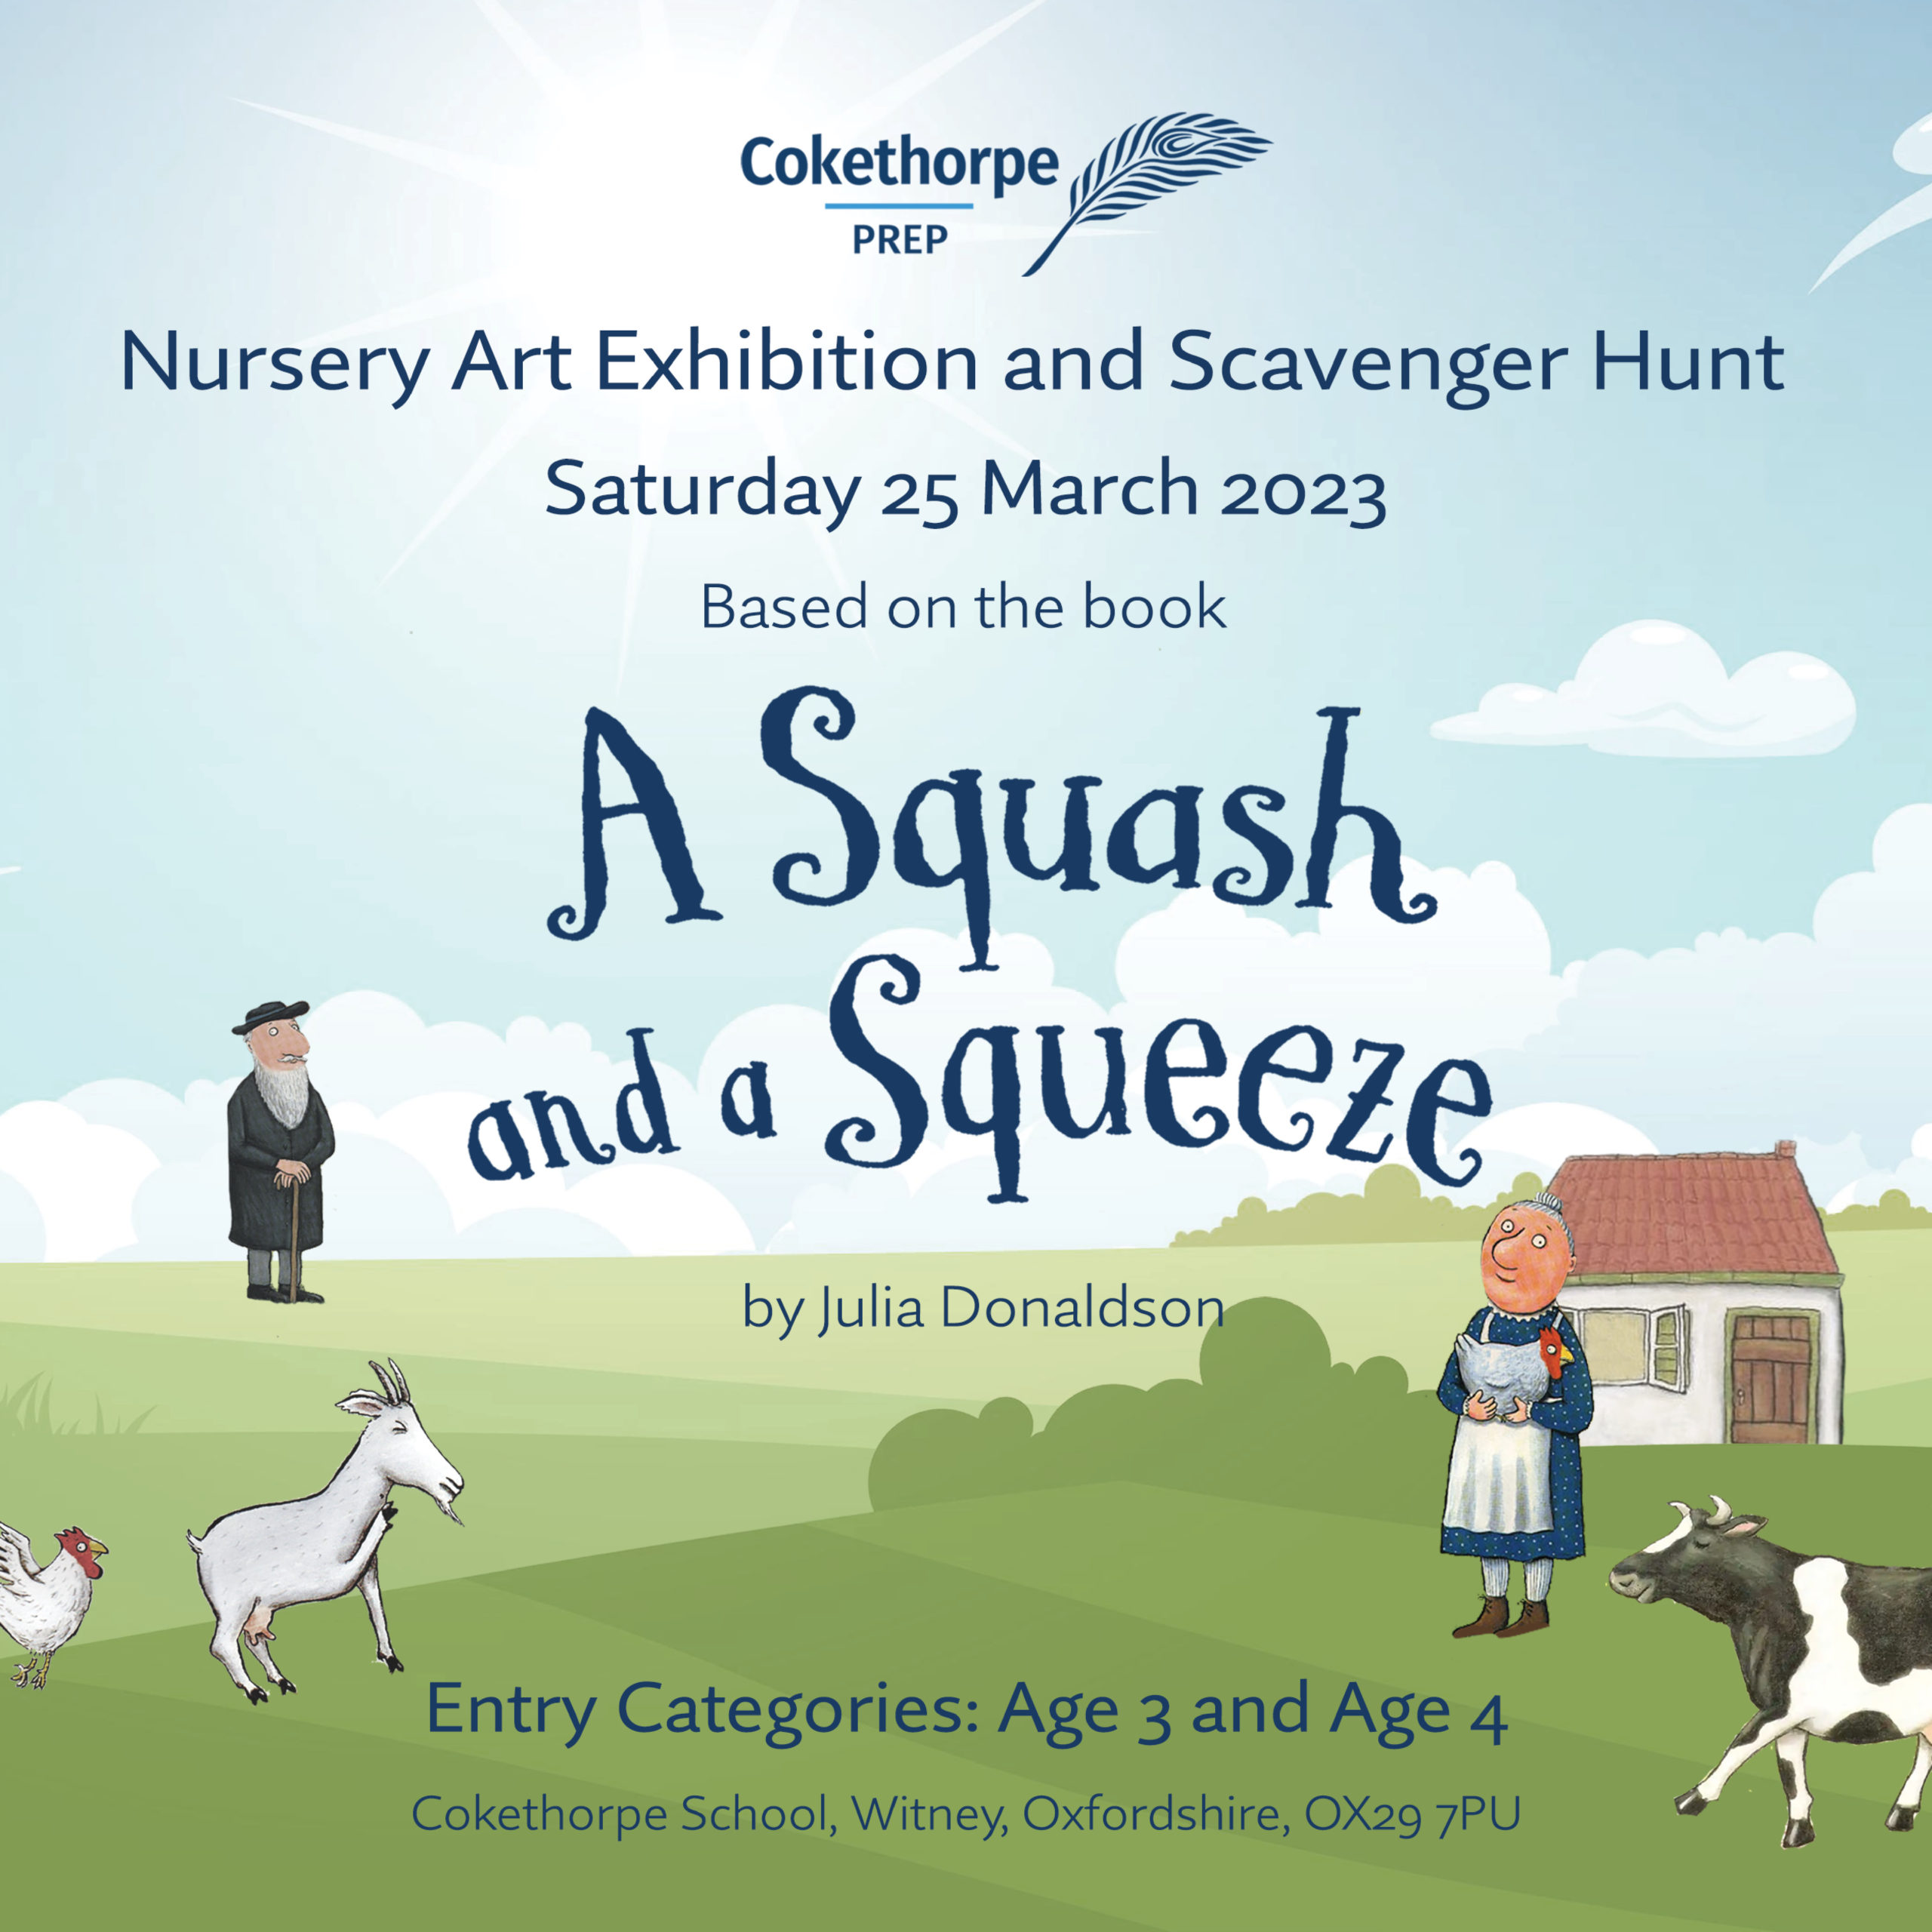 Nursery Art Competition Event 2023 - A Squash and a Squeeze - Julia Donaldson - Whats on at Cokethorpe School